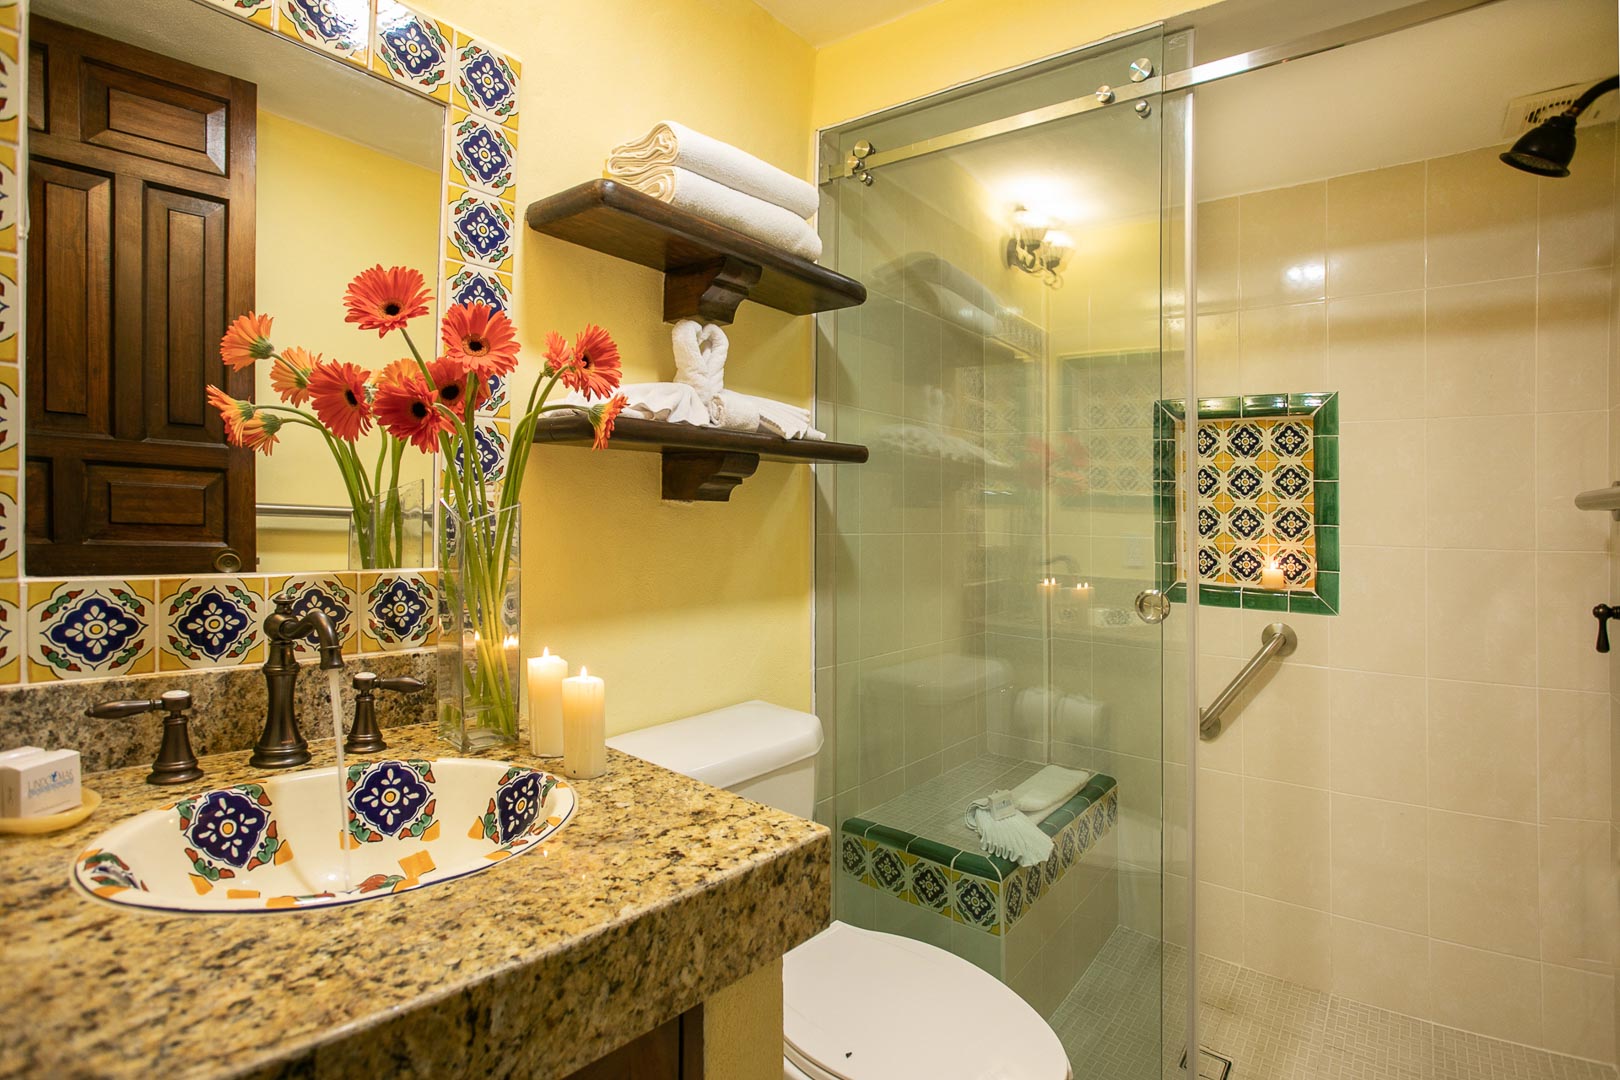 a clean bathroom with a walk-in shower at TPI's Lindo Mar Resort in Puerto Vallarta, Mexico.